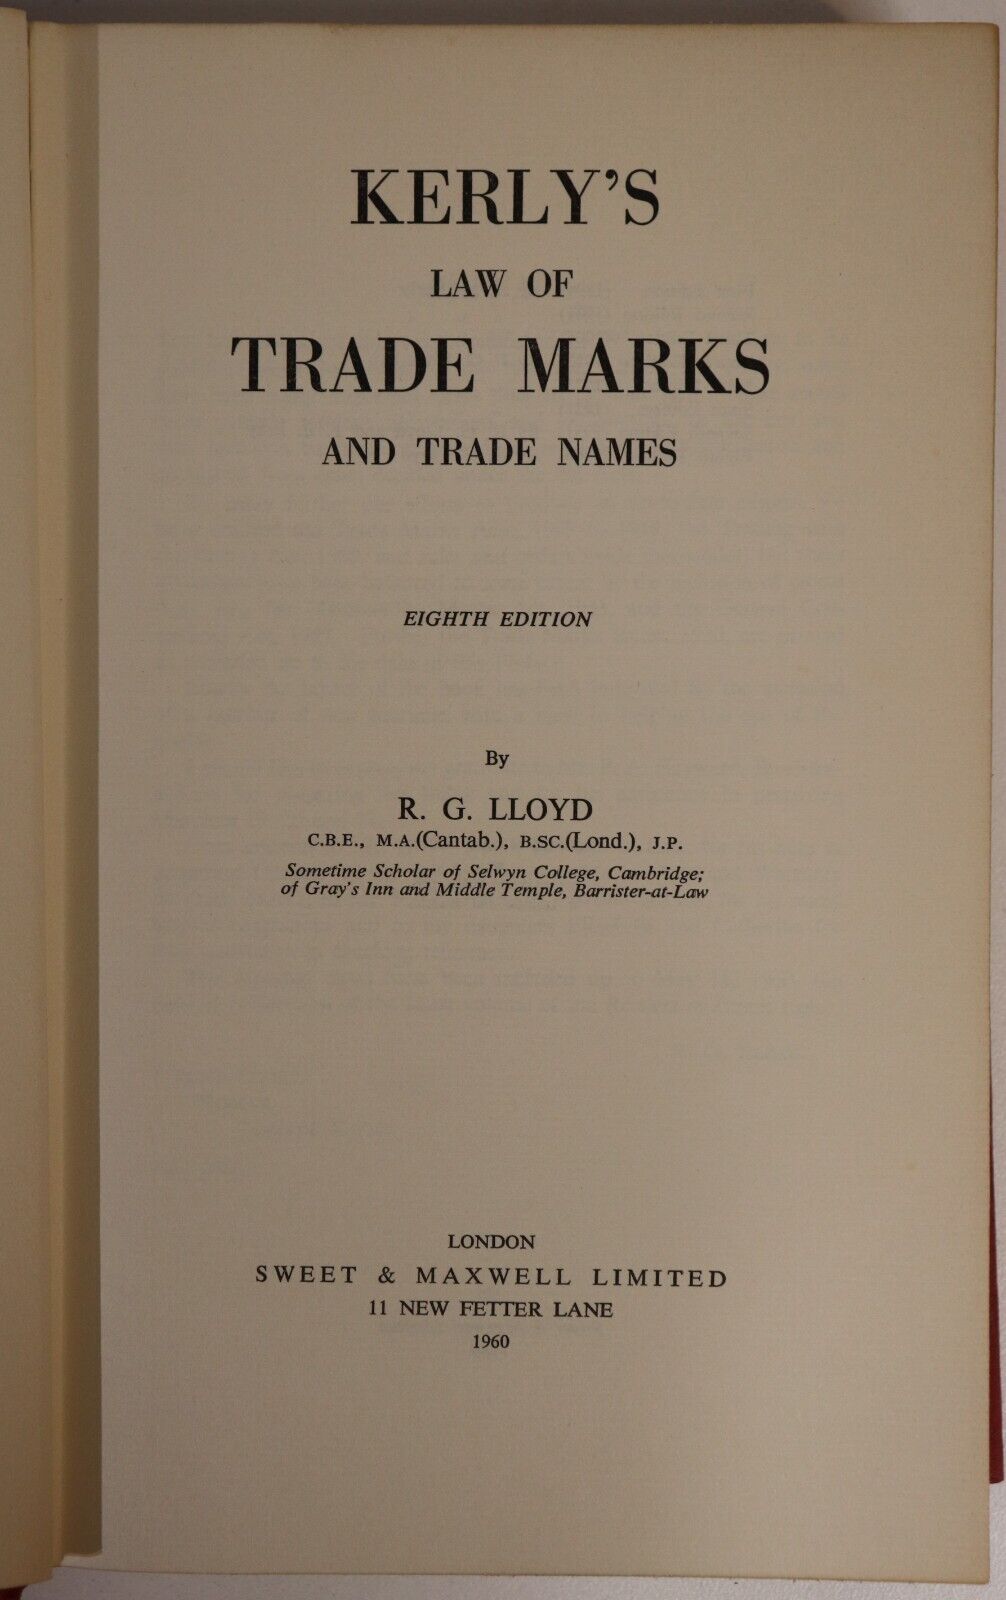 Kerly's Law Of Trade Marks & Trade Names - 1960 - Vintage Legal History Book